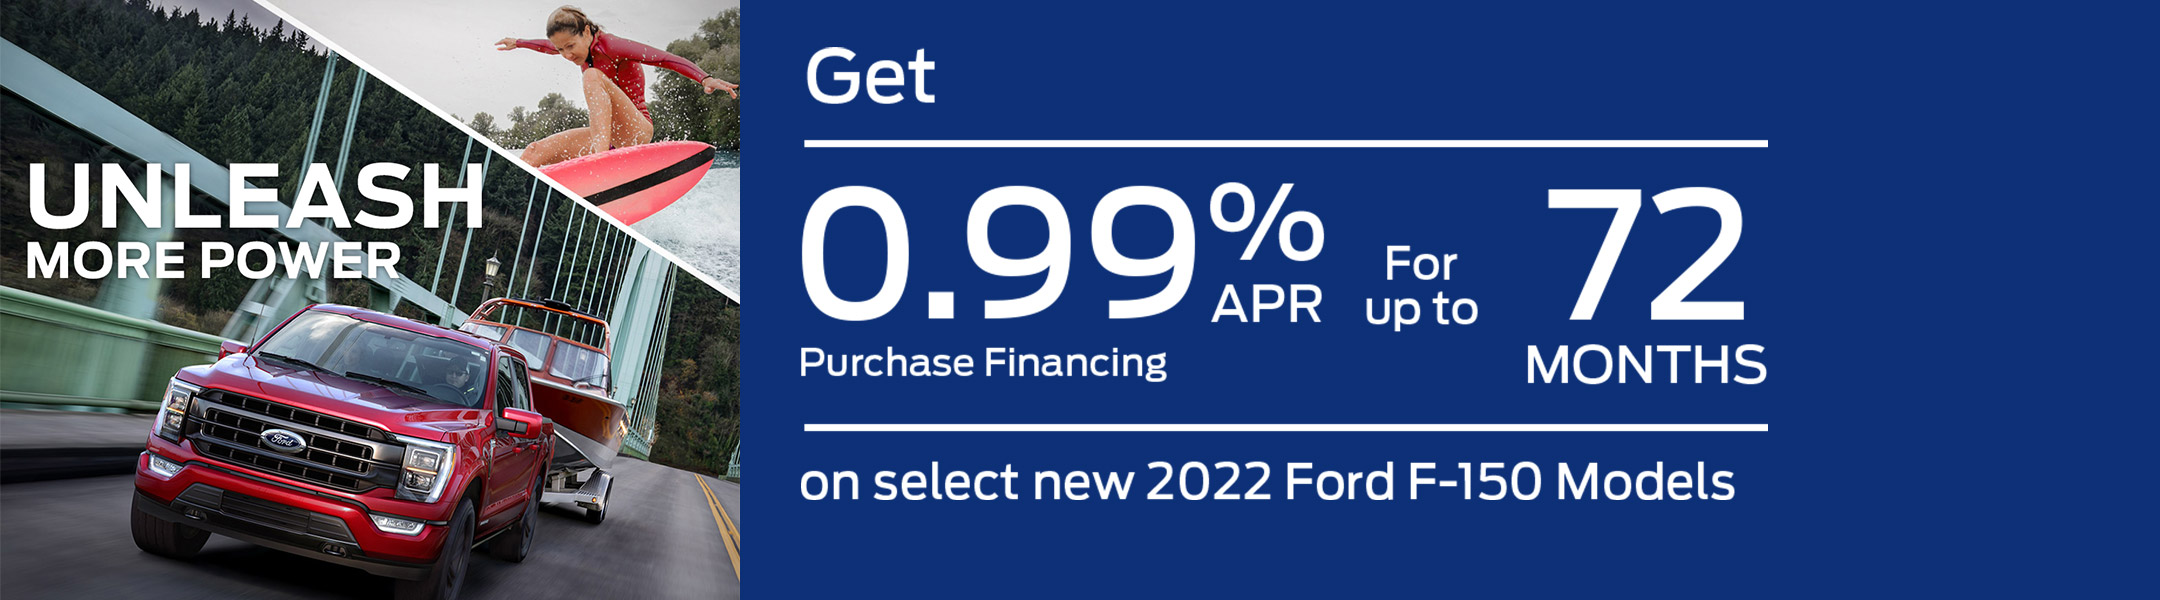 2022 F-150 Special Offer in Toronto, ON